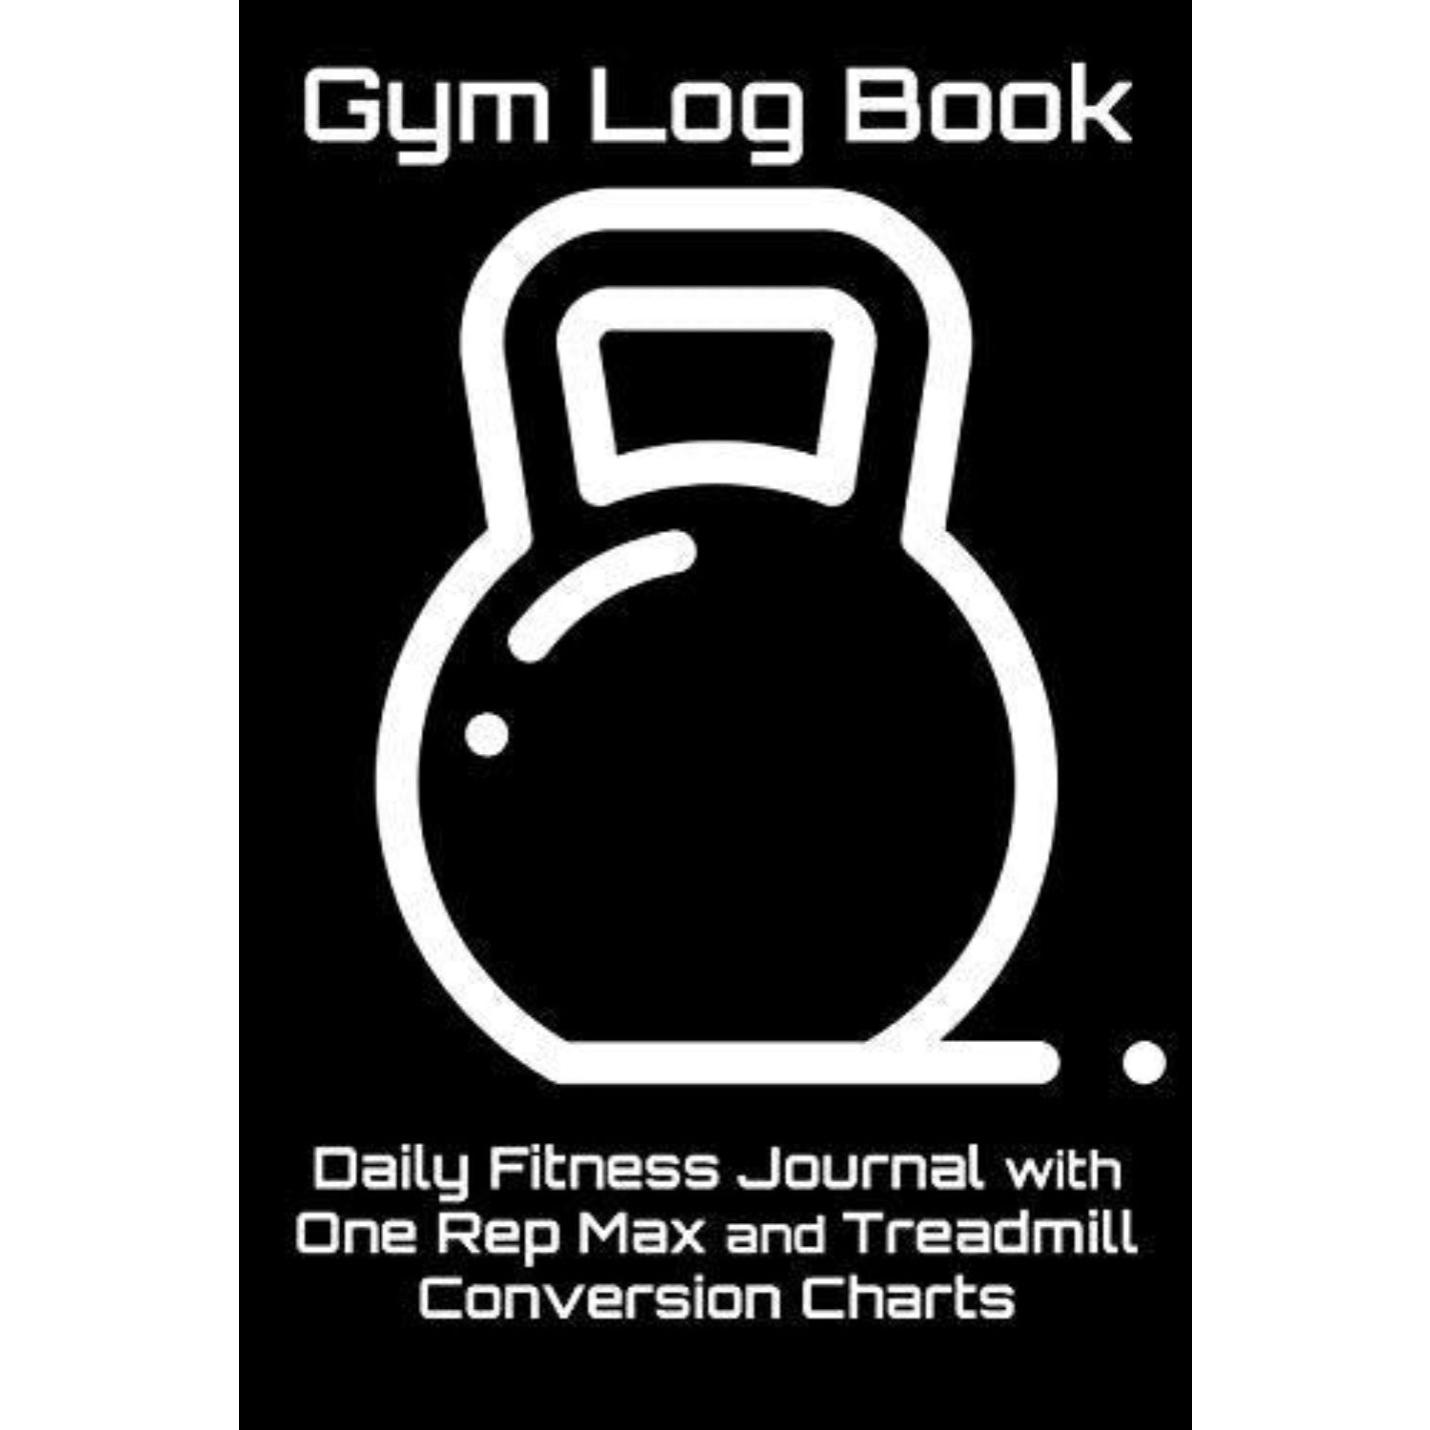 Gym Log Book: Daily Fitness Journal with One Rep Max and Treadmill Conversion Charts (Black) - happygetfit.com